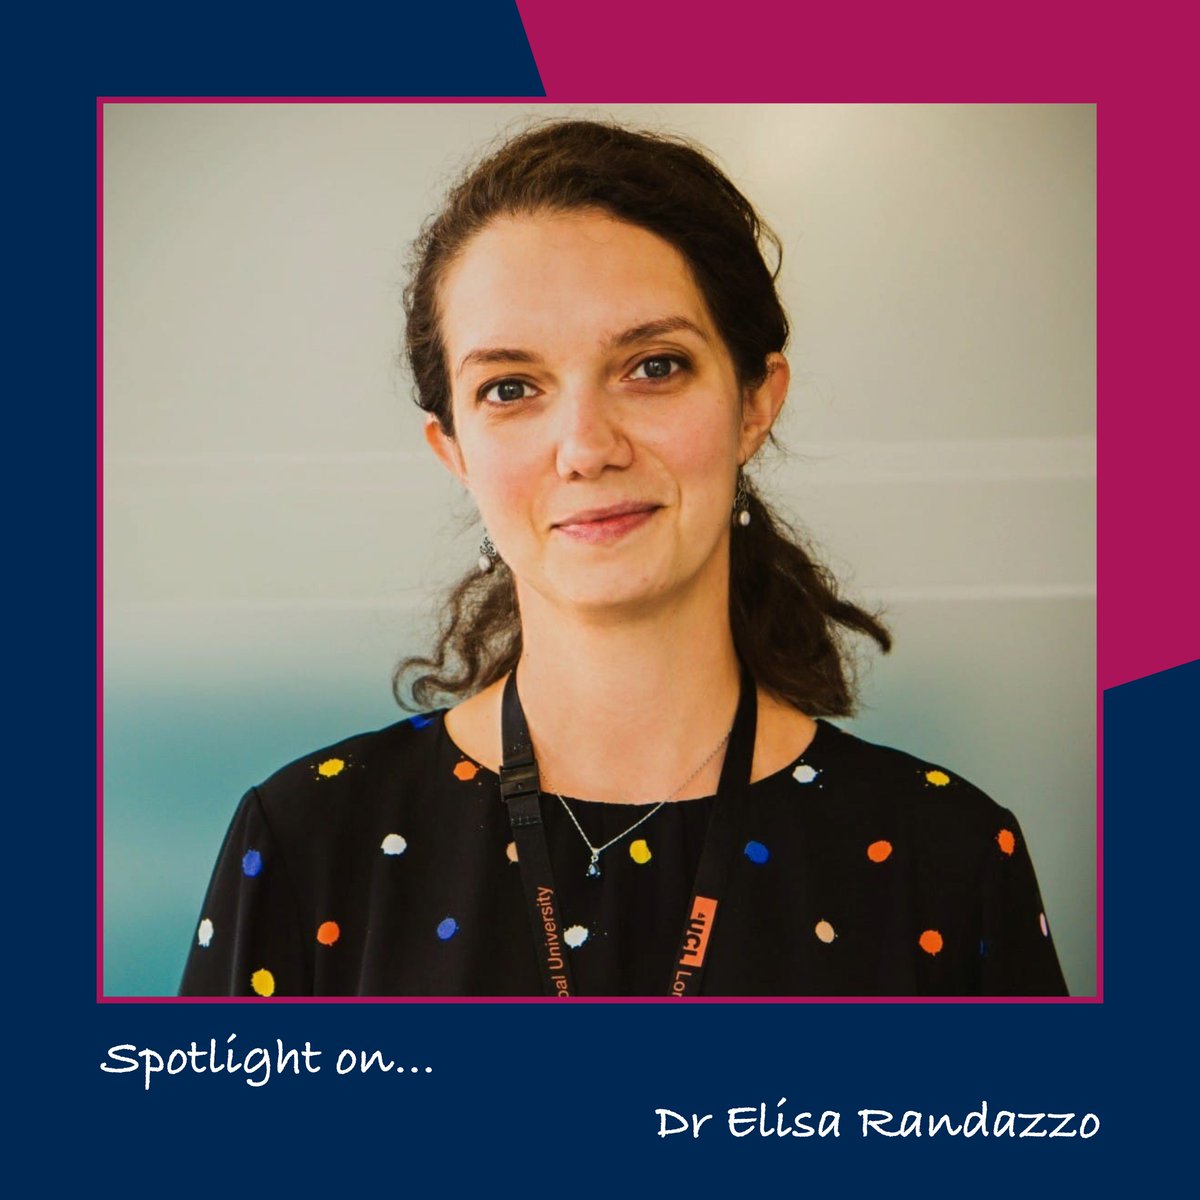 “Listen more to the people around you and, if possible, listen better.” We love this mantra from Dr Elisa Randazzo. Read her full profile in our 'Spotlight on' feature ▶️ buff.ly/3Iaqome